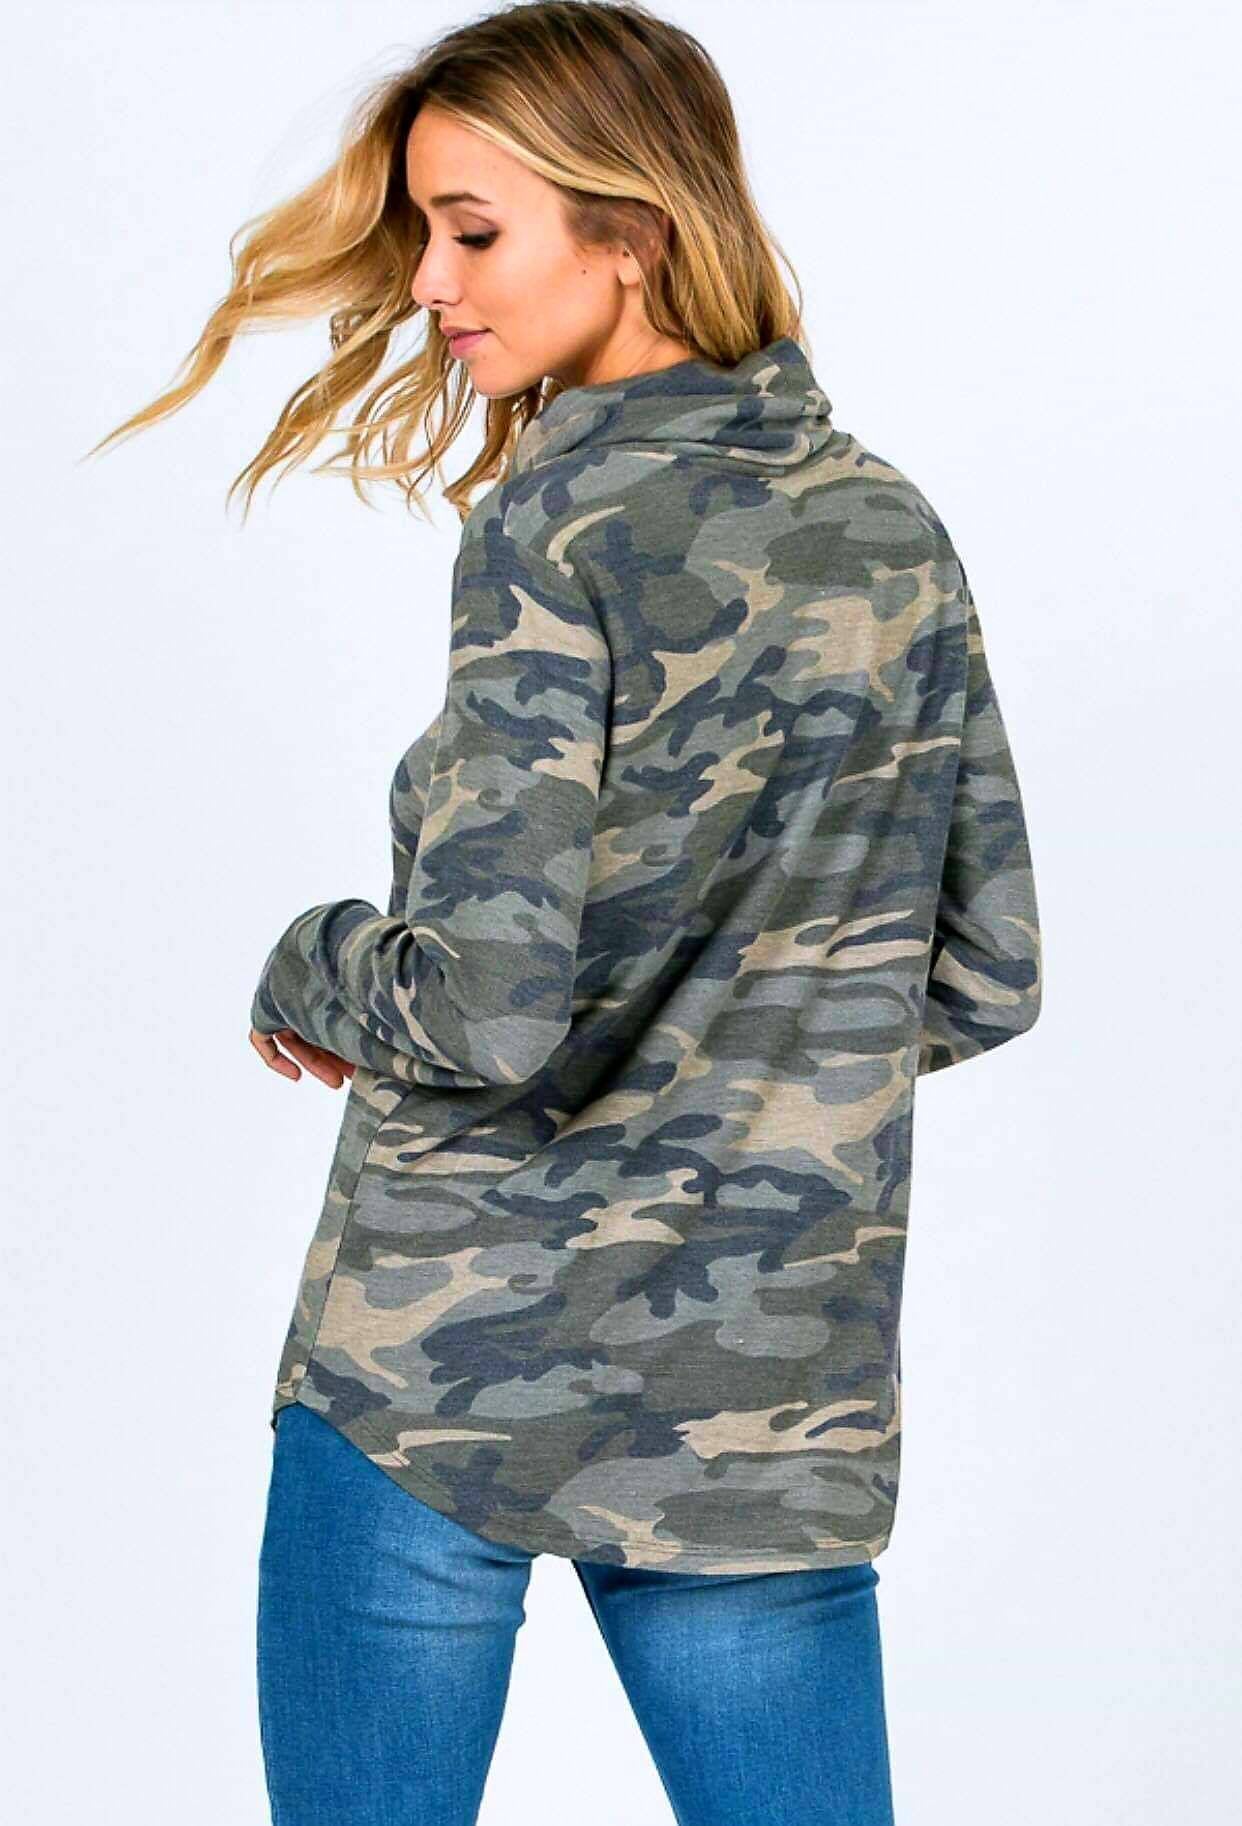 Monogrammed Camo Cowl Neck Pullover - Embroidered Ladies Camouflage Cowlneck Shirt, Women's Personalized Clothing, Monogram, Camo Sweatshirt